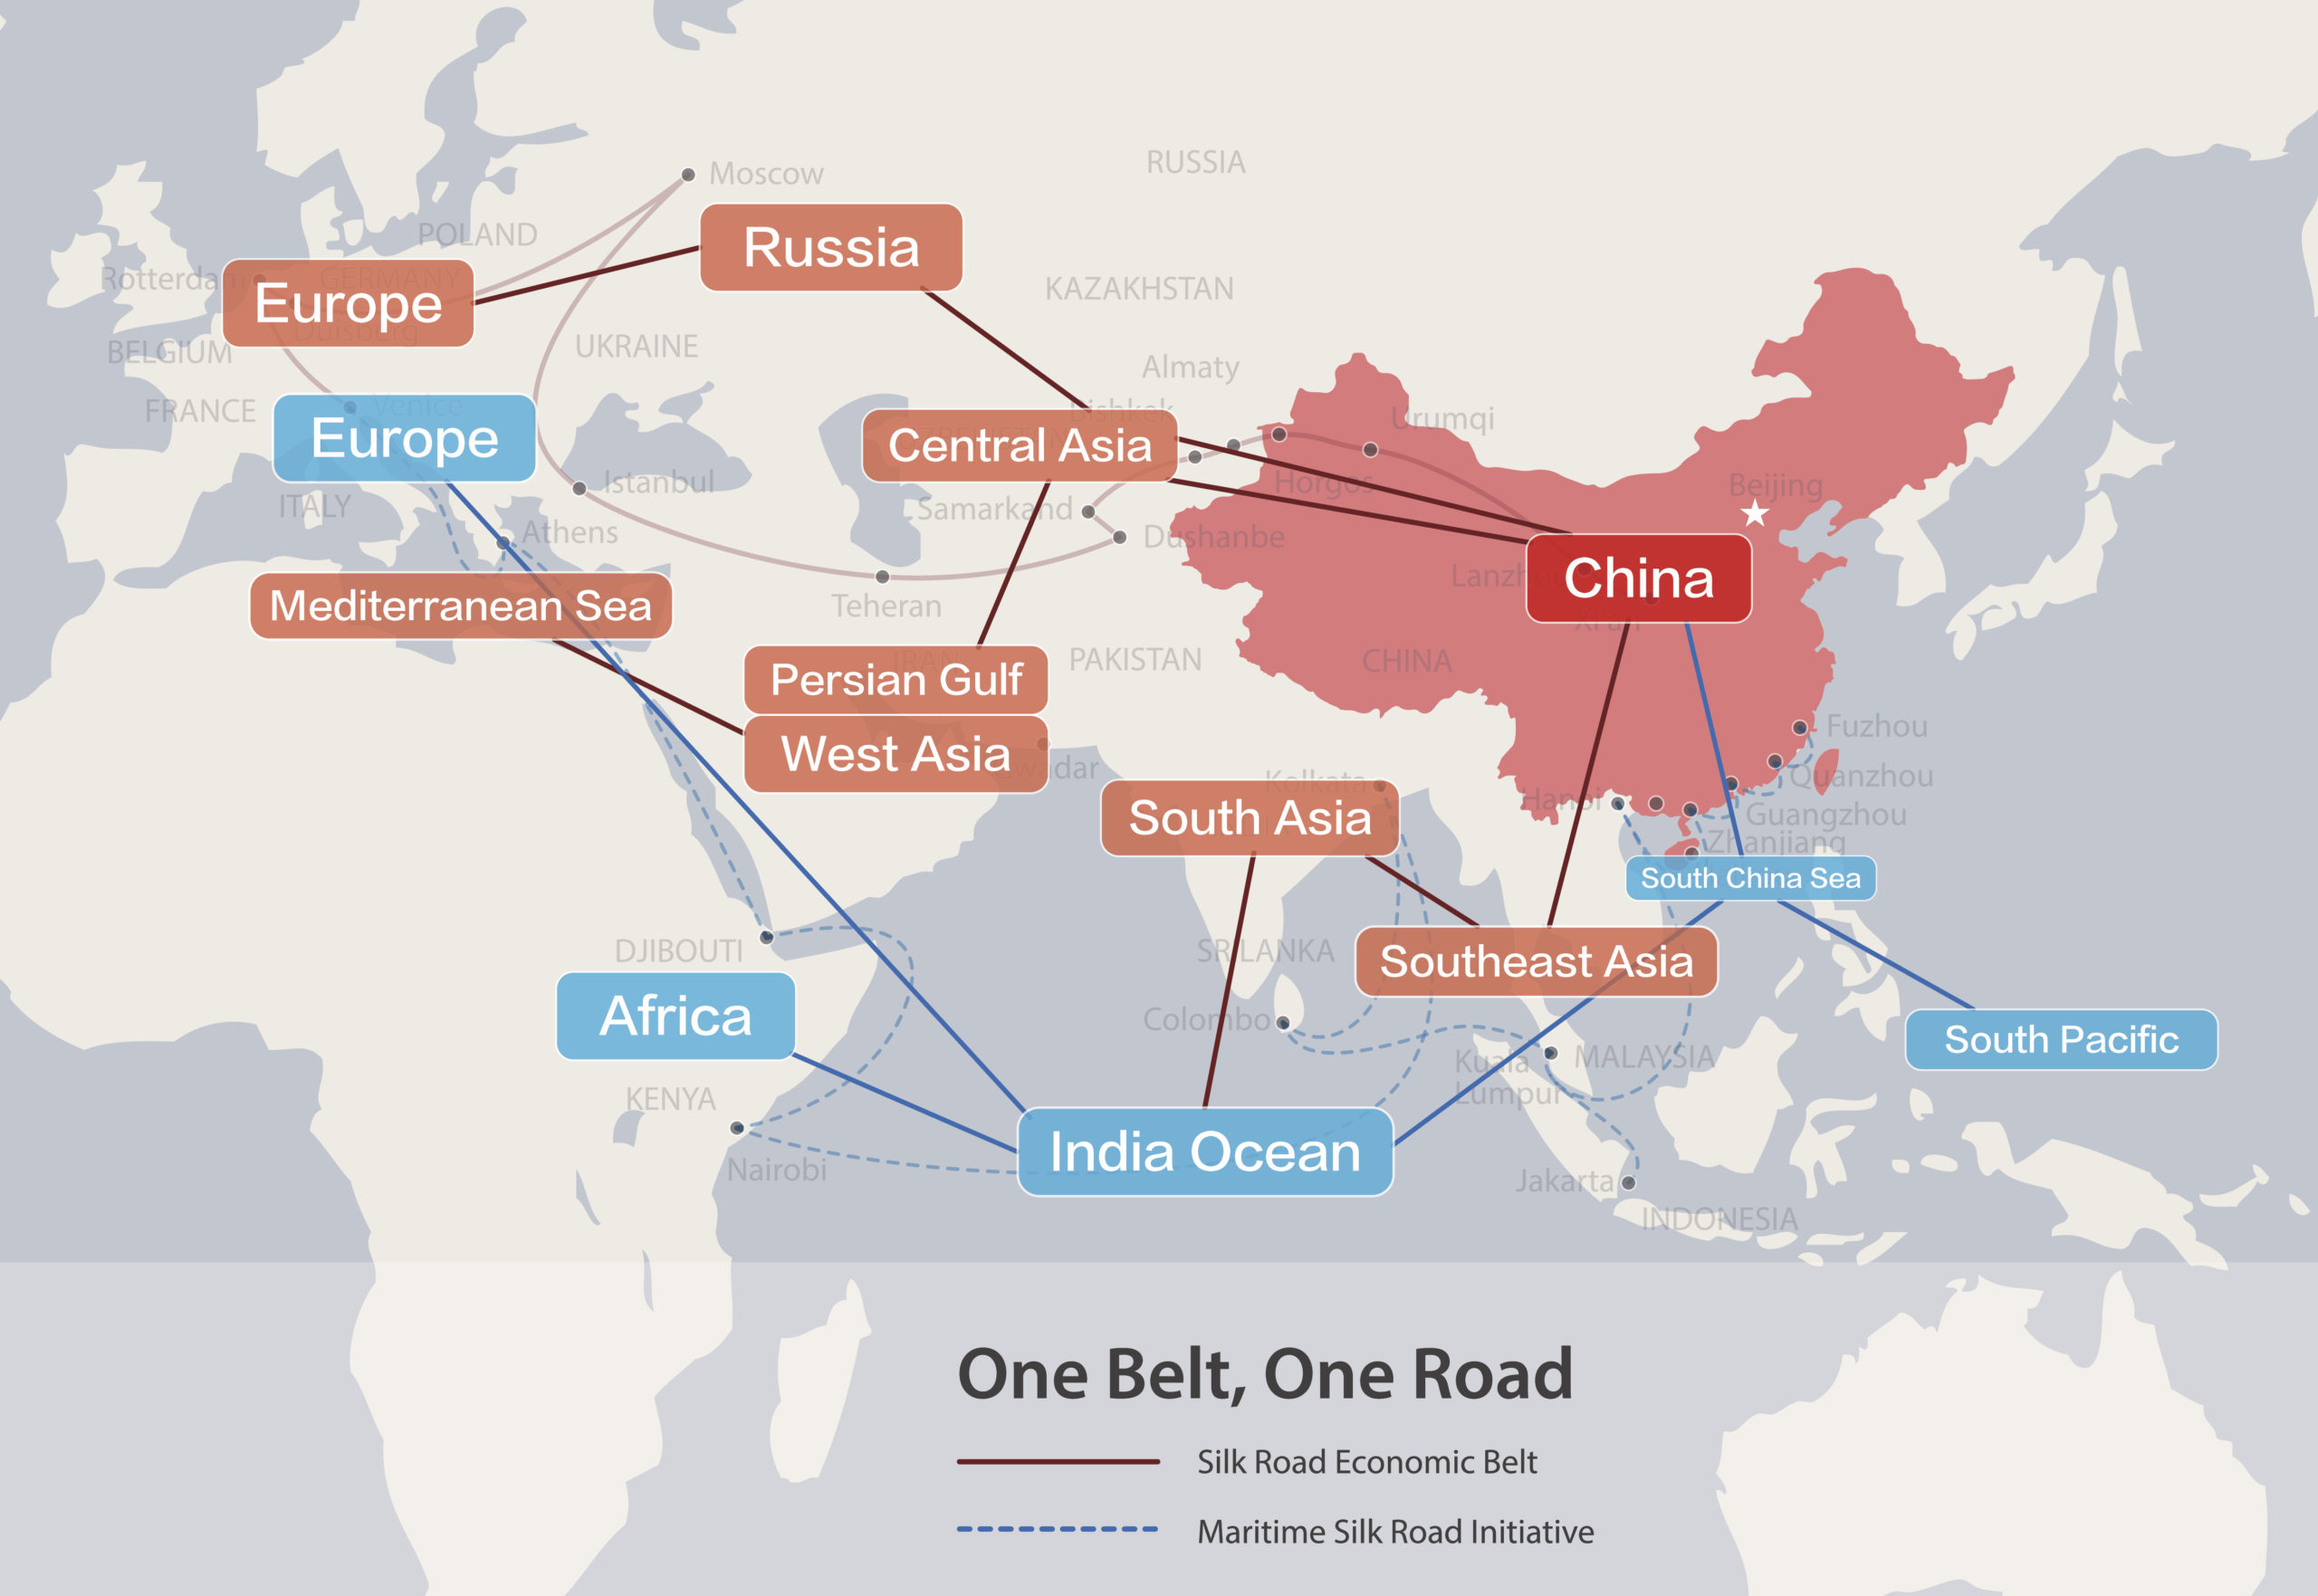 One Belt, One Road, Chinese strategic investment in the 21st century map.